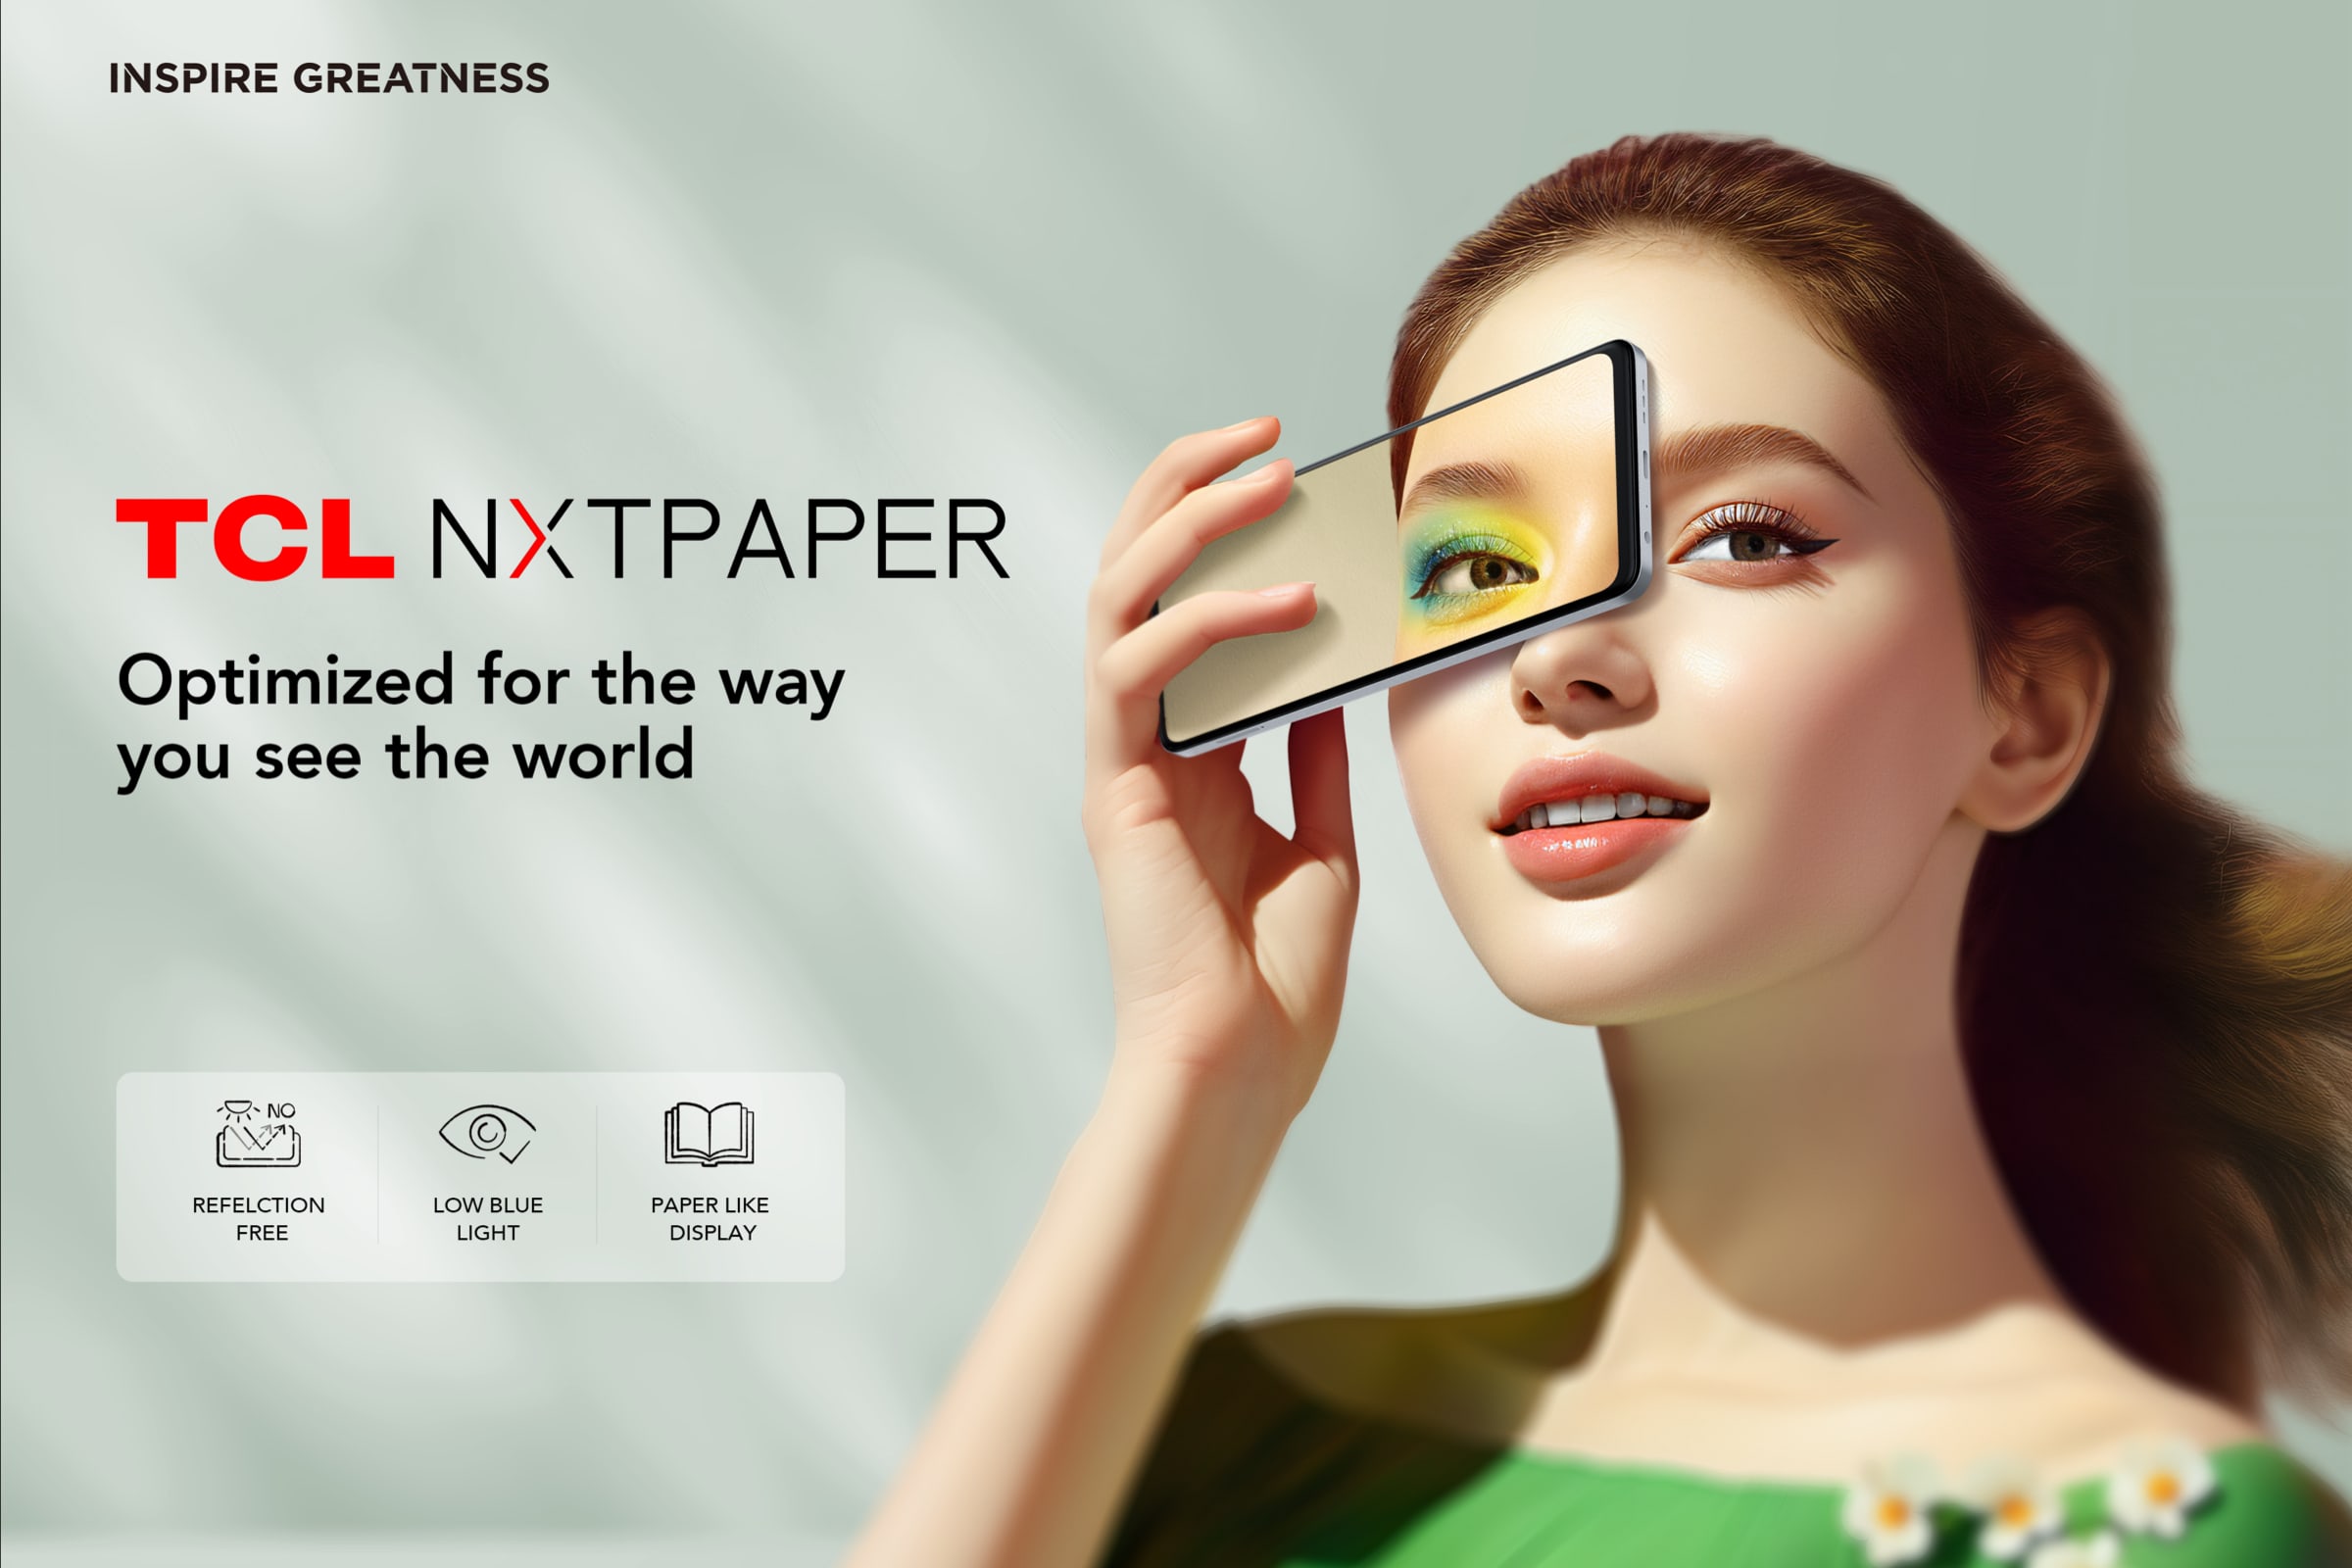 TCL NXTPAPER Technology 3.0